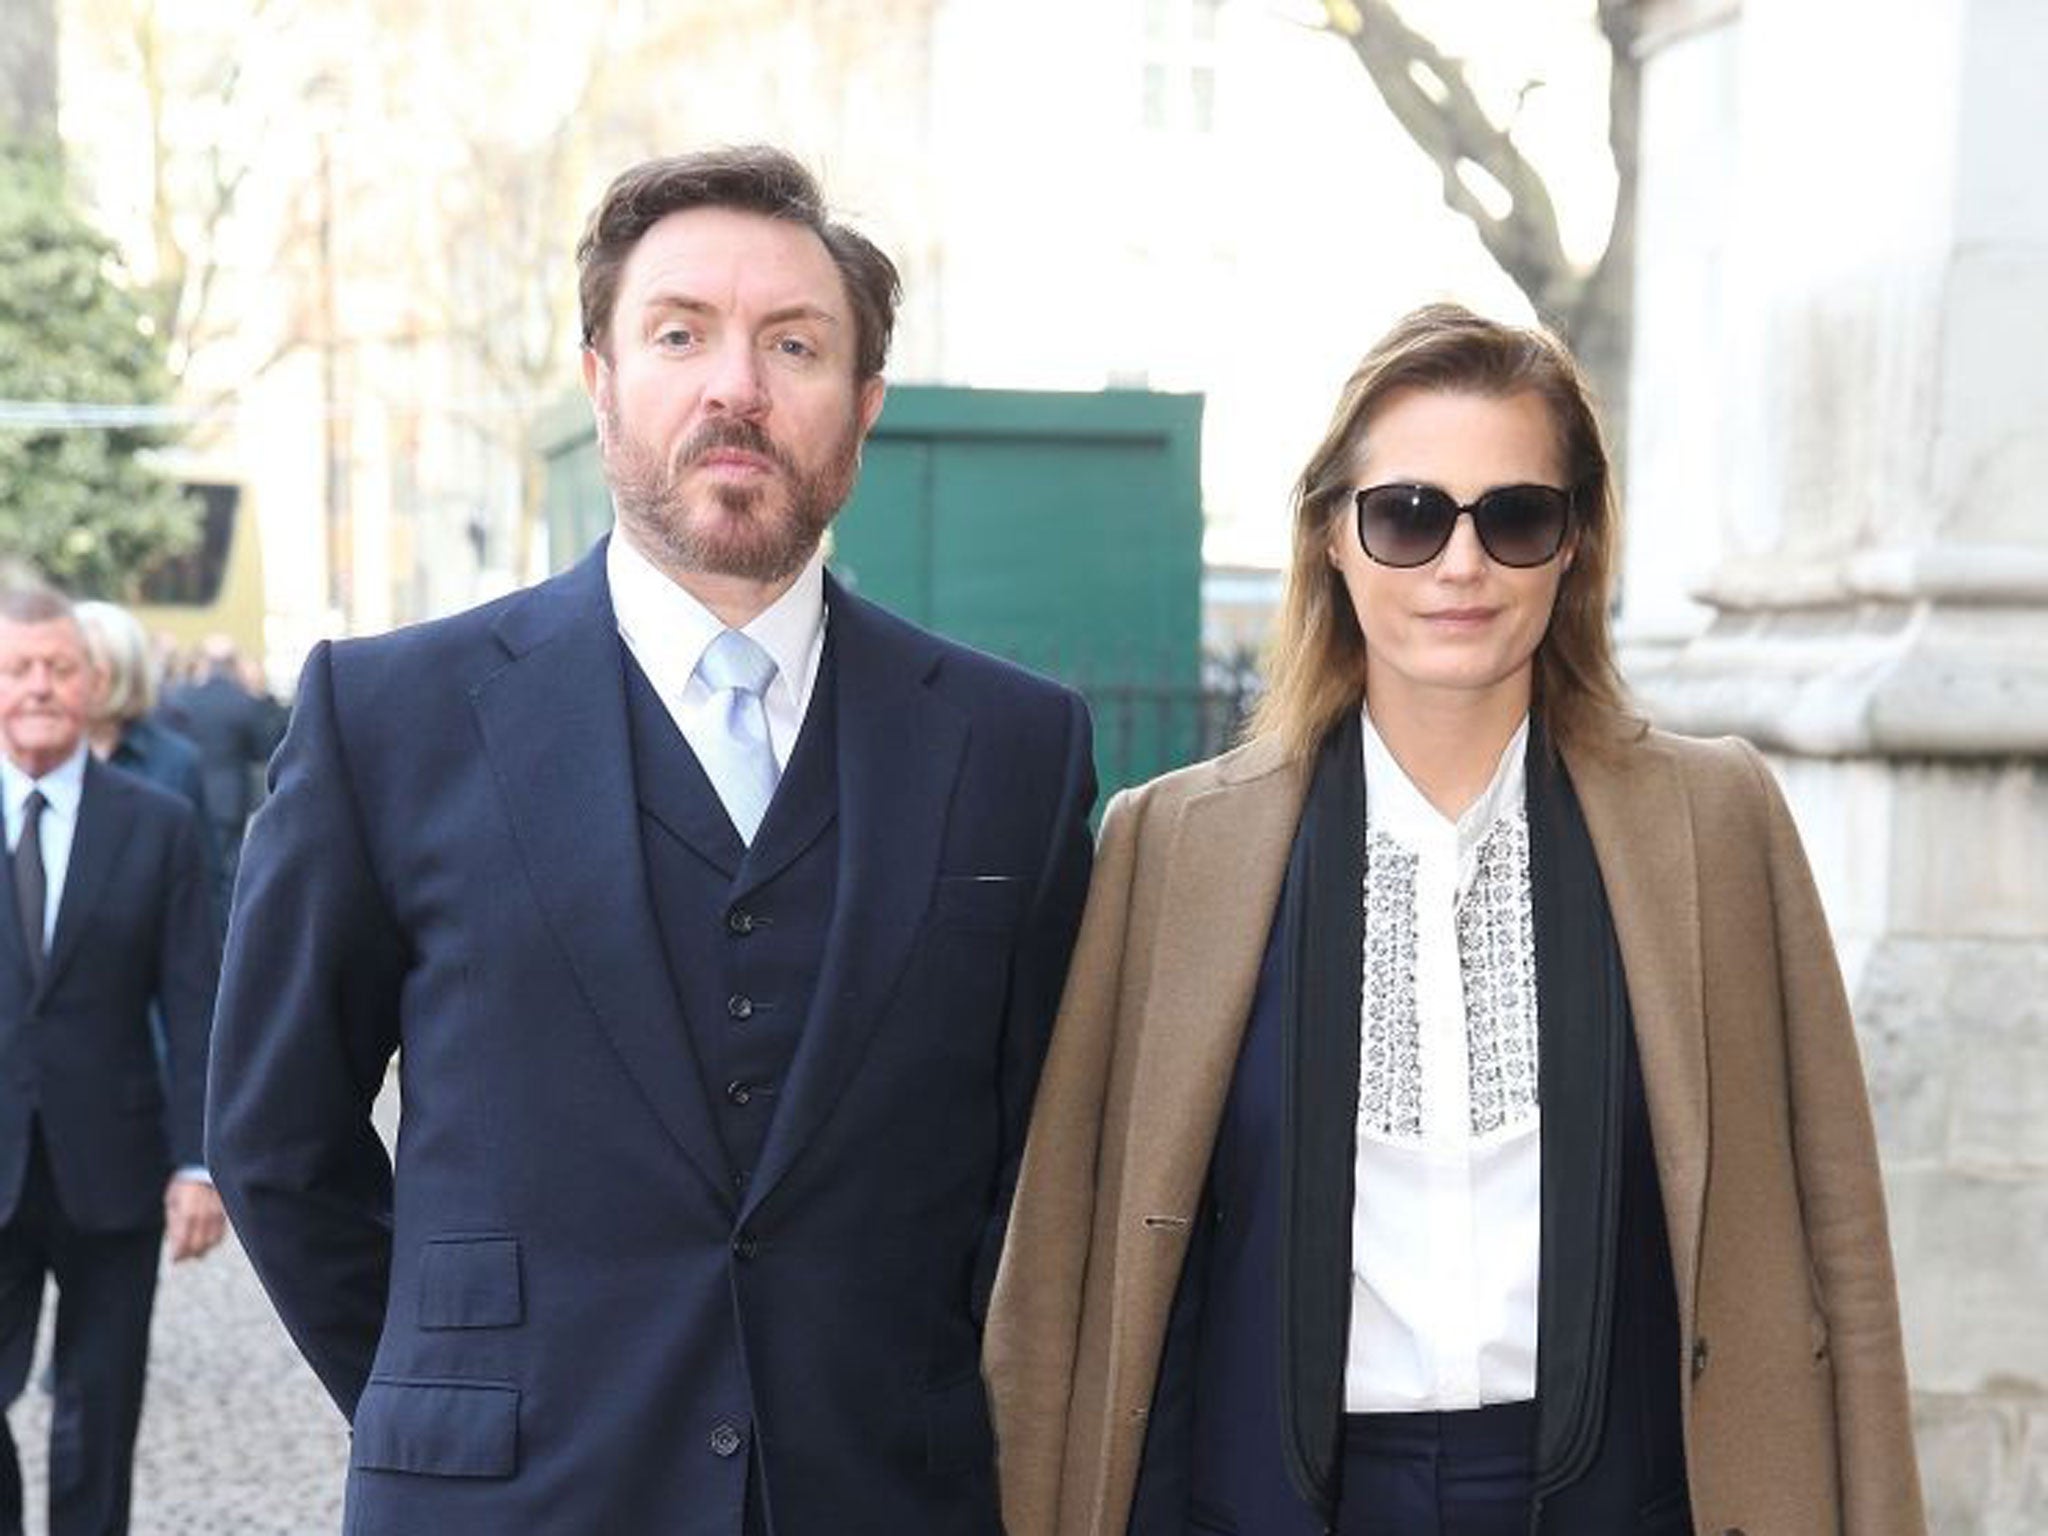 Simon and Yasmin Le Bon, who married in 1985, would qualify for the deal